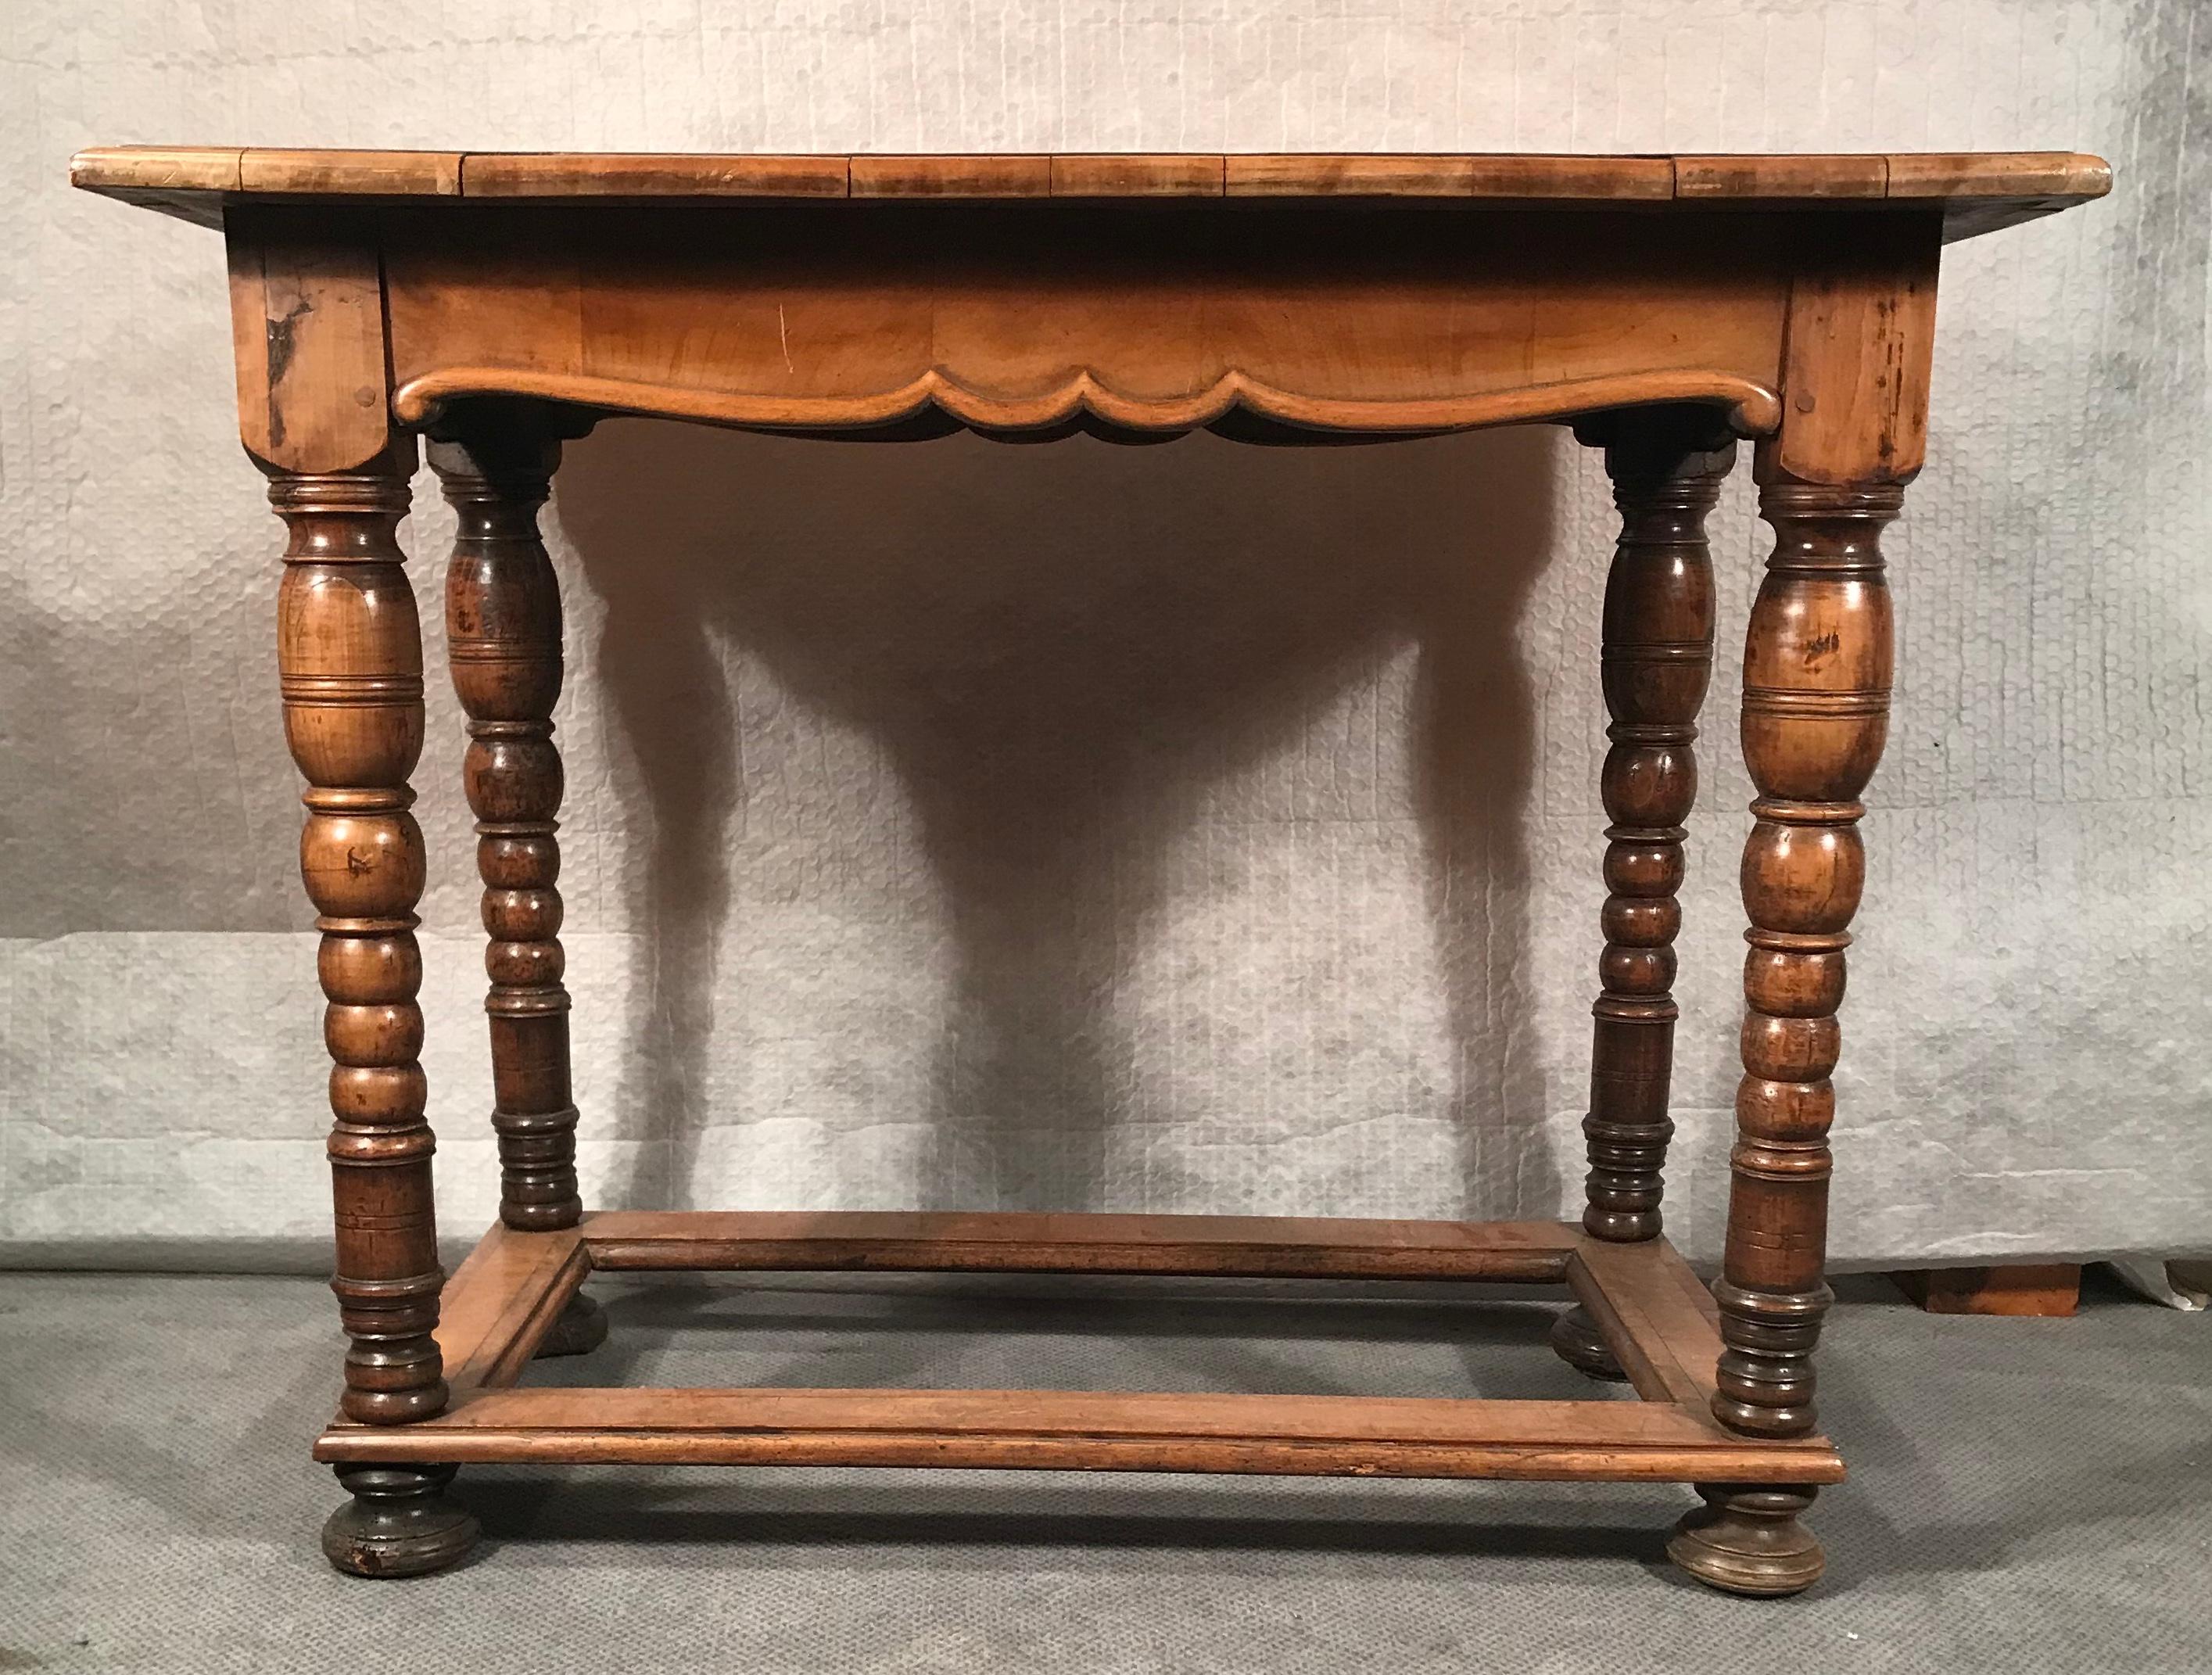 Original Baroque Table, Southern Germany, 18th Century 1